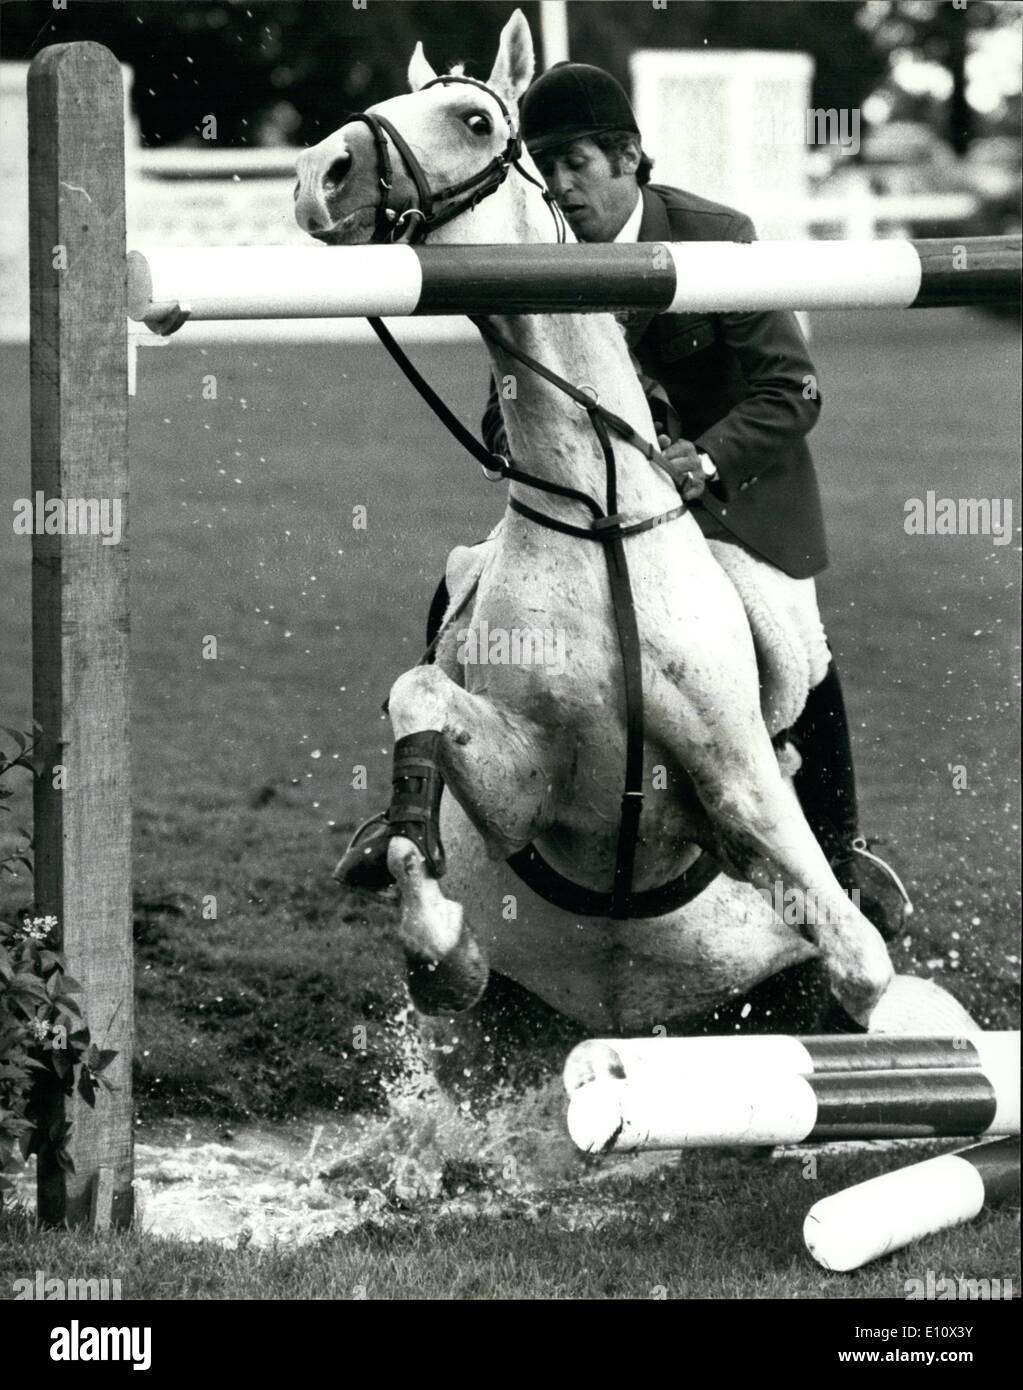 Jul. 07, 1974 - Men 's World Horse Jumping Championship at Hickstead Schockmohle of West Germany Falls: The first round of the Men' s World Horse Jumping Championships started today at Hickstead ,Sussex. Photo shows Alwin Schockemohle of West Germany comes off when his horse Rex The Rodeer refused to take the water Ditch. Stock Photo